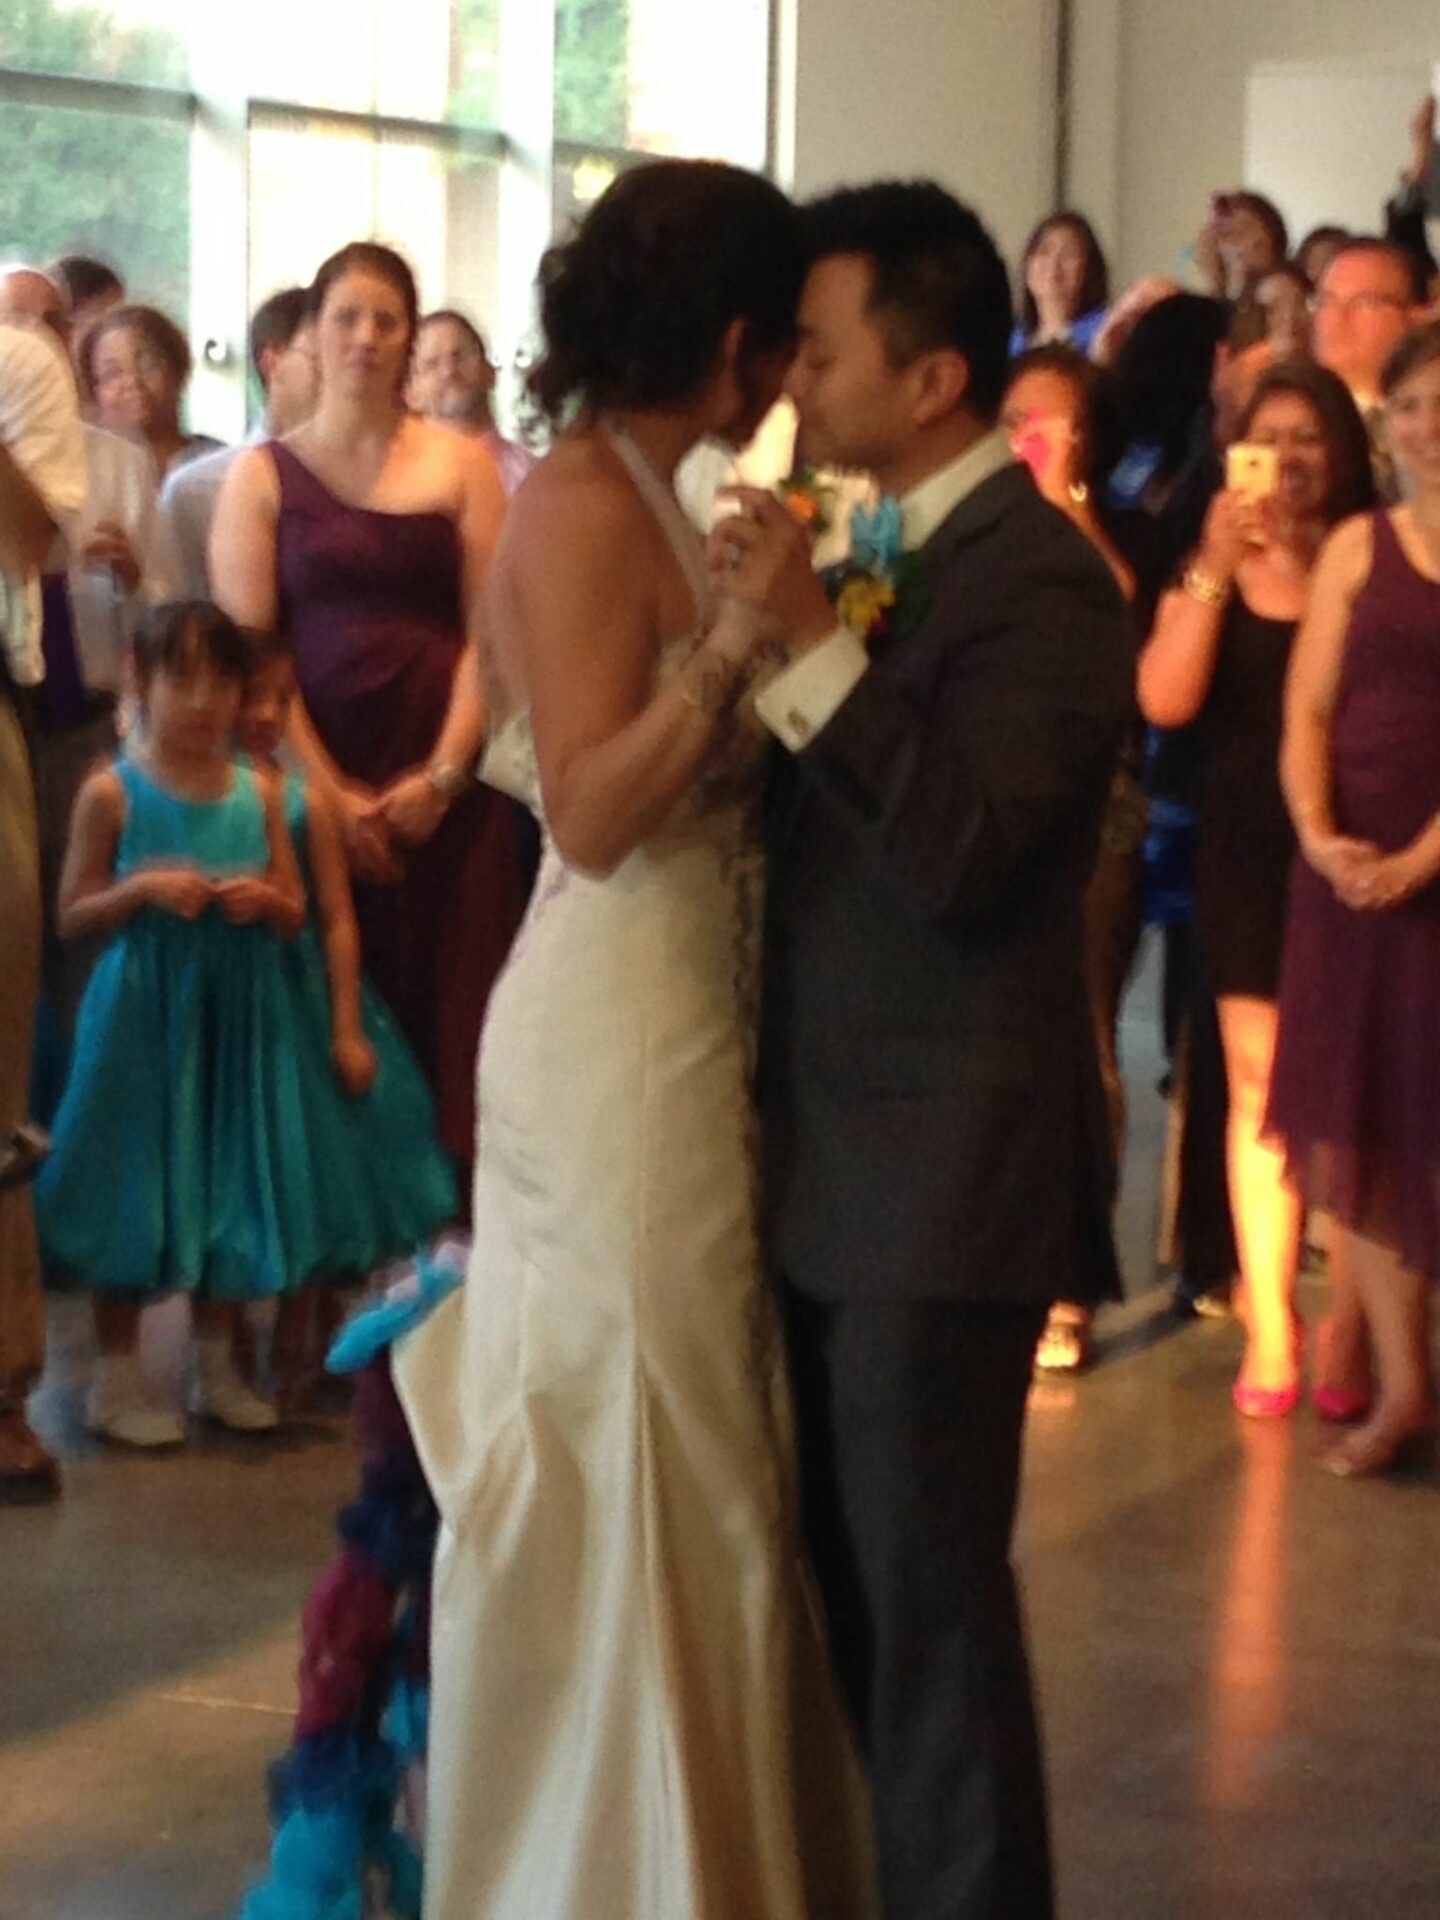 A wedding bride and groom sharing their first dance in front of a crowd.